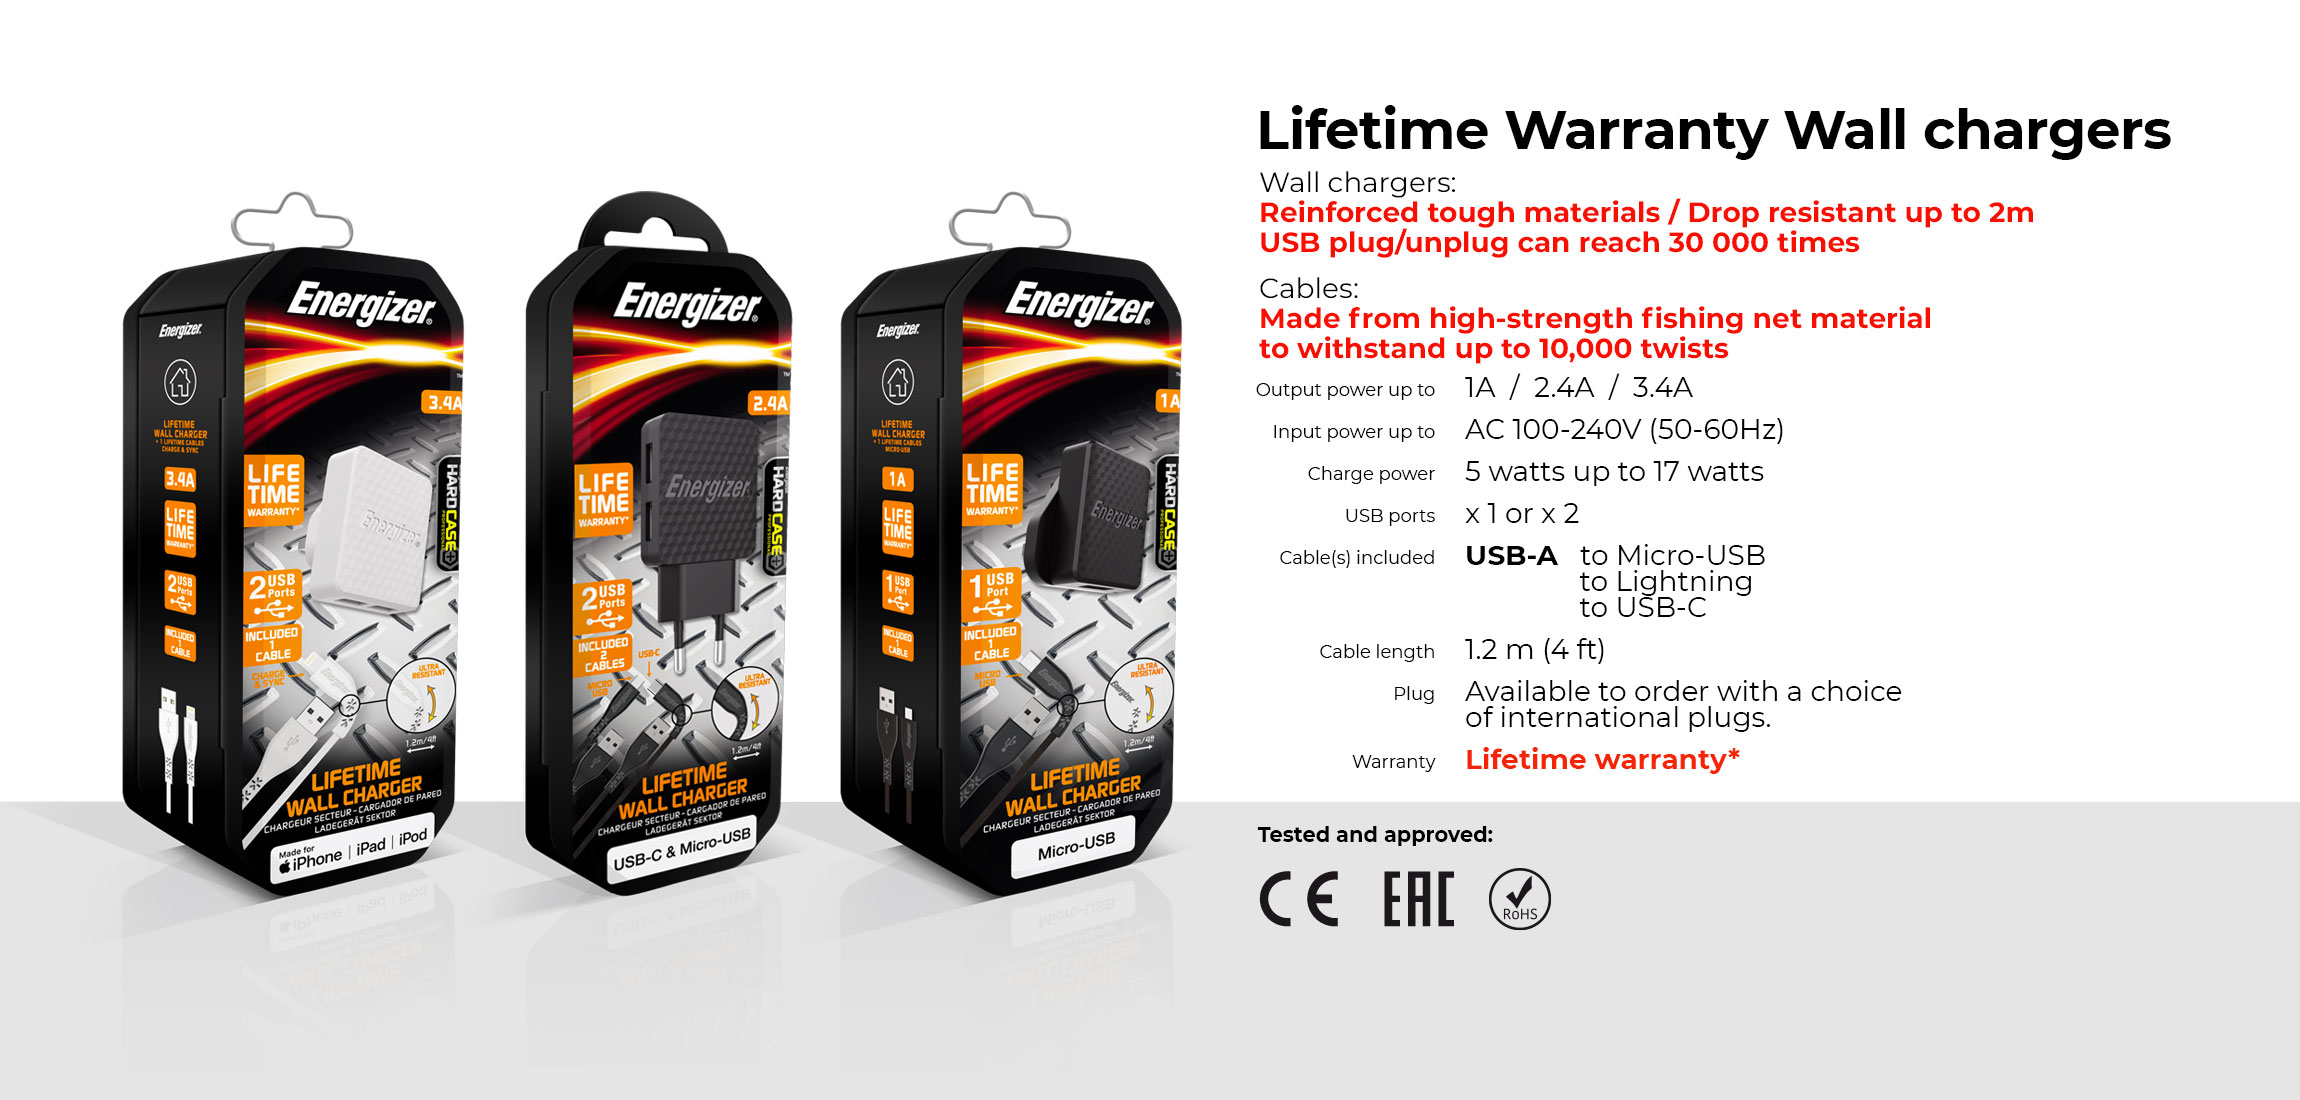 AT-wall-chargers-LIFE-pack-EN.jpg